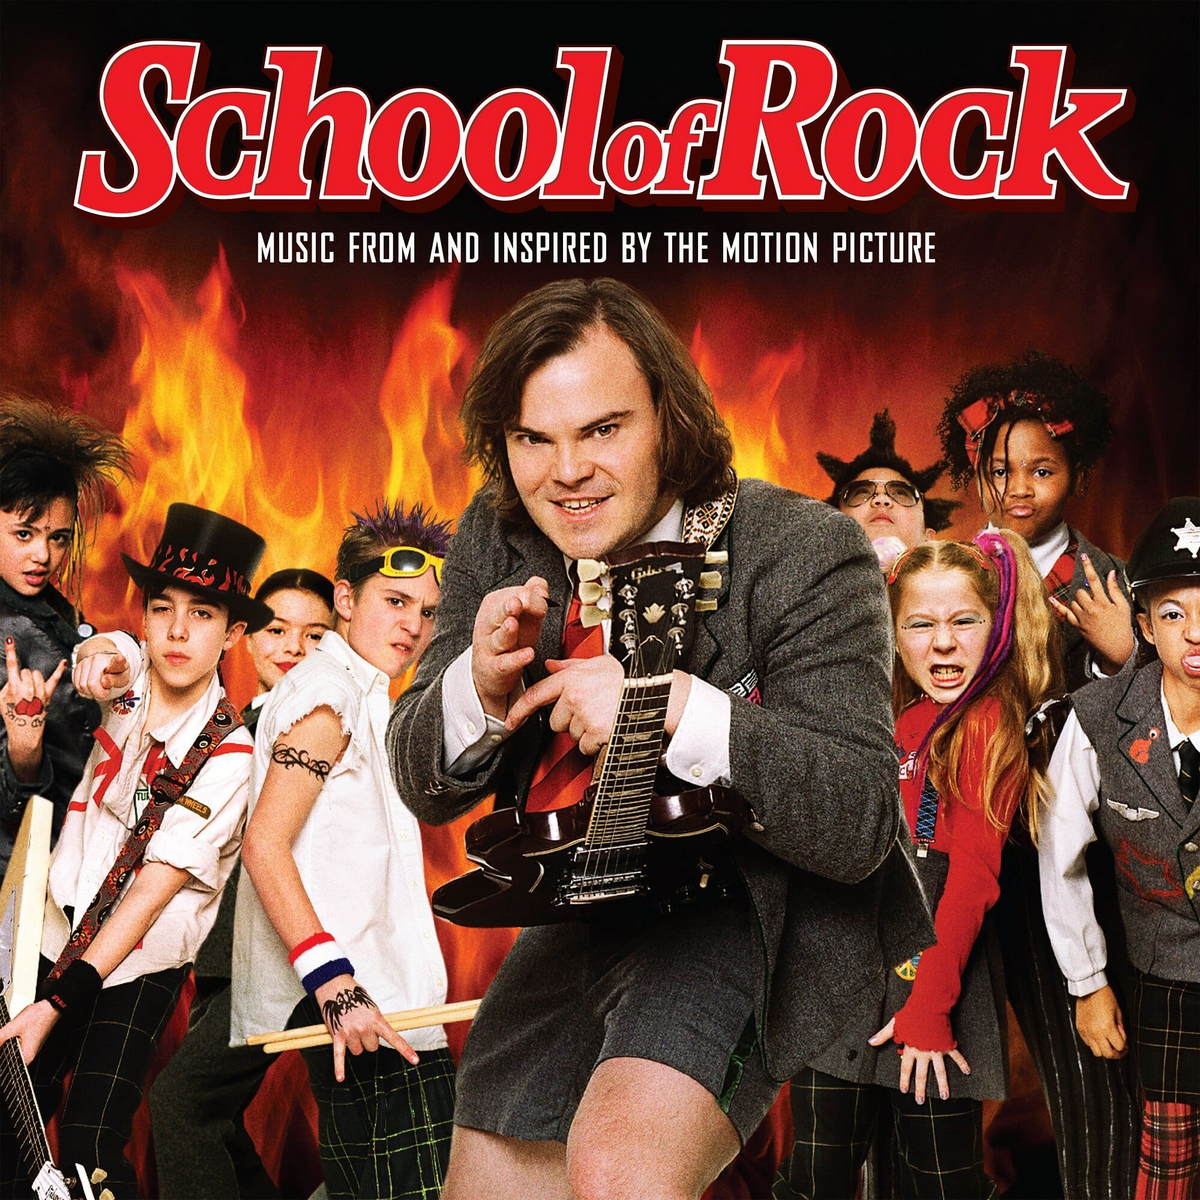 Саундтрек WM School of Rock (Music From And Inspired By The Motion Picture) (Rocktober 2021/Limited/Orange Vinyl) look at the picture and write words the first grade and the second grade practice word post primary school students word post